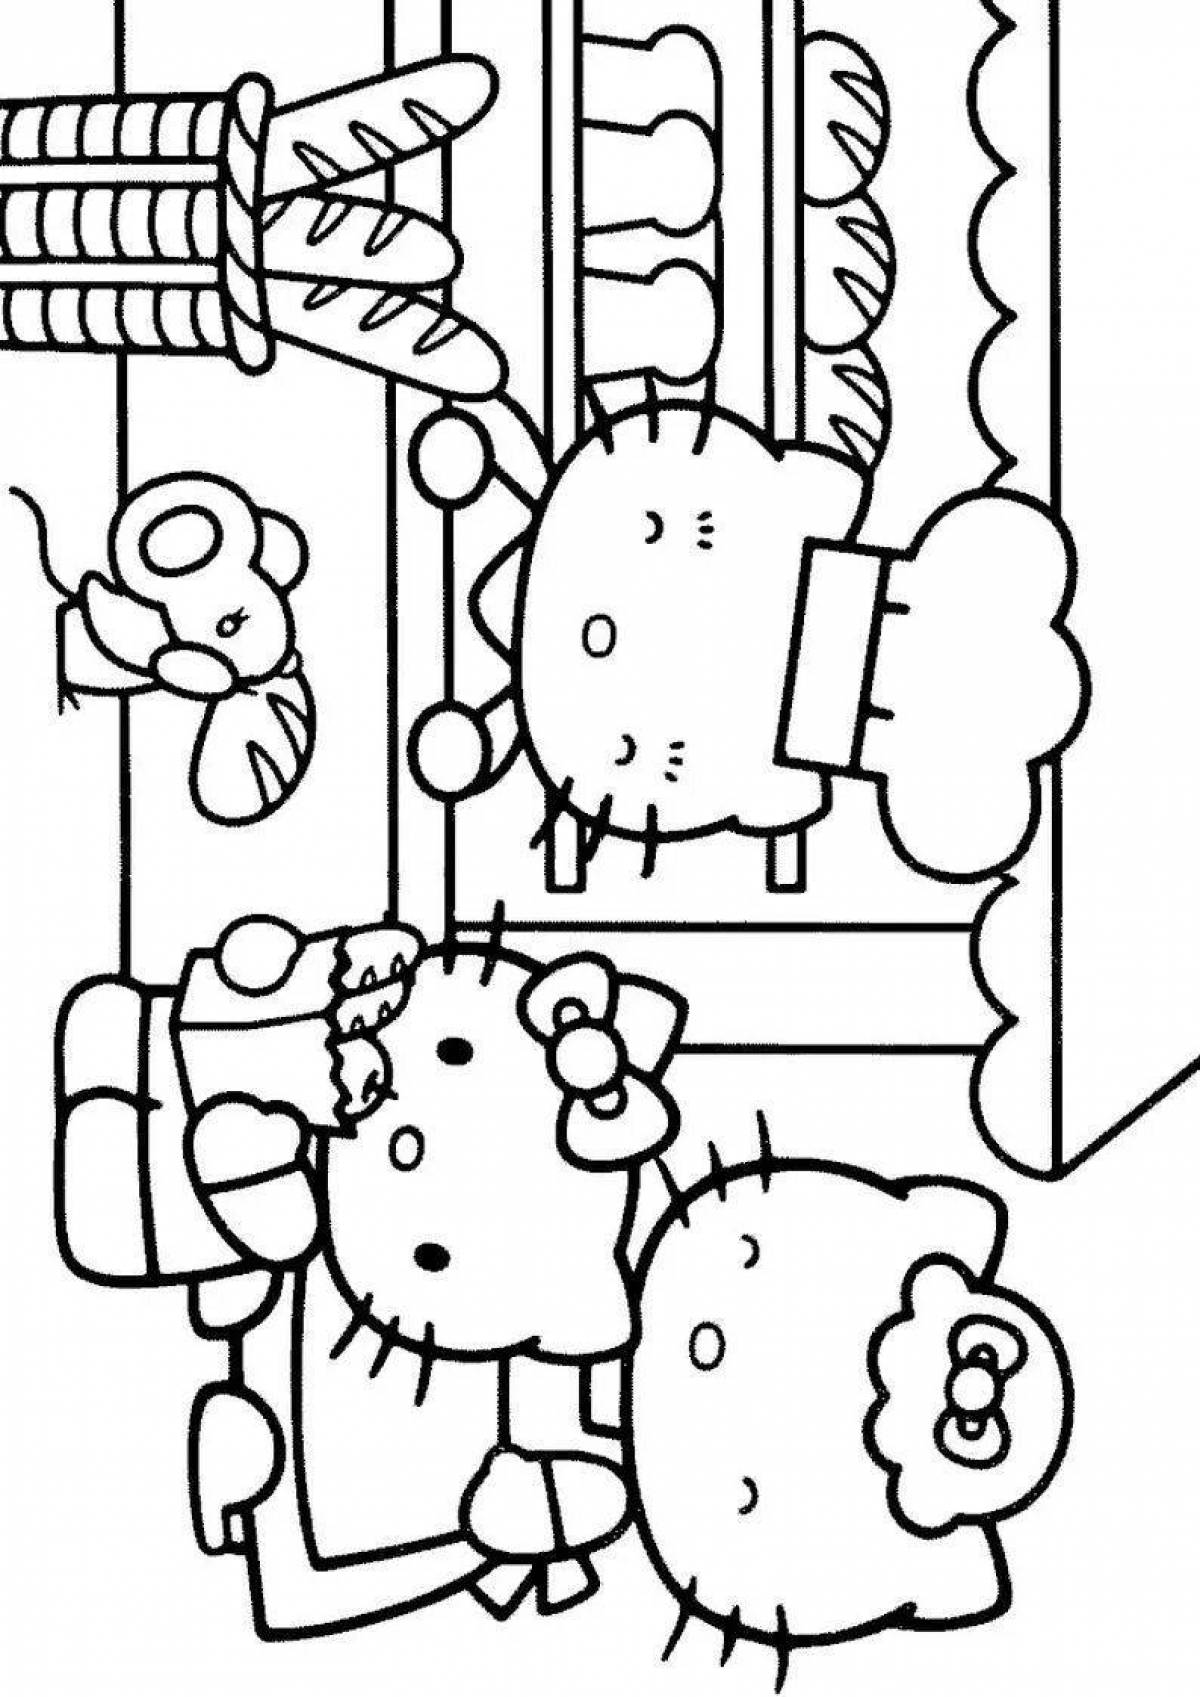 Coloring book jubilant kitty new year